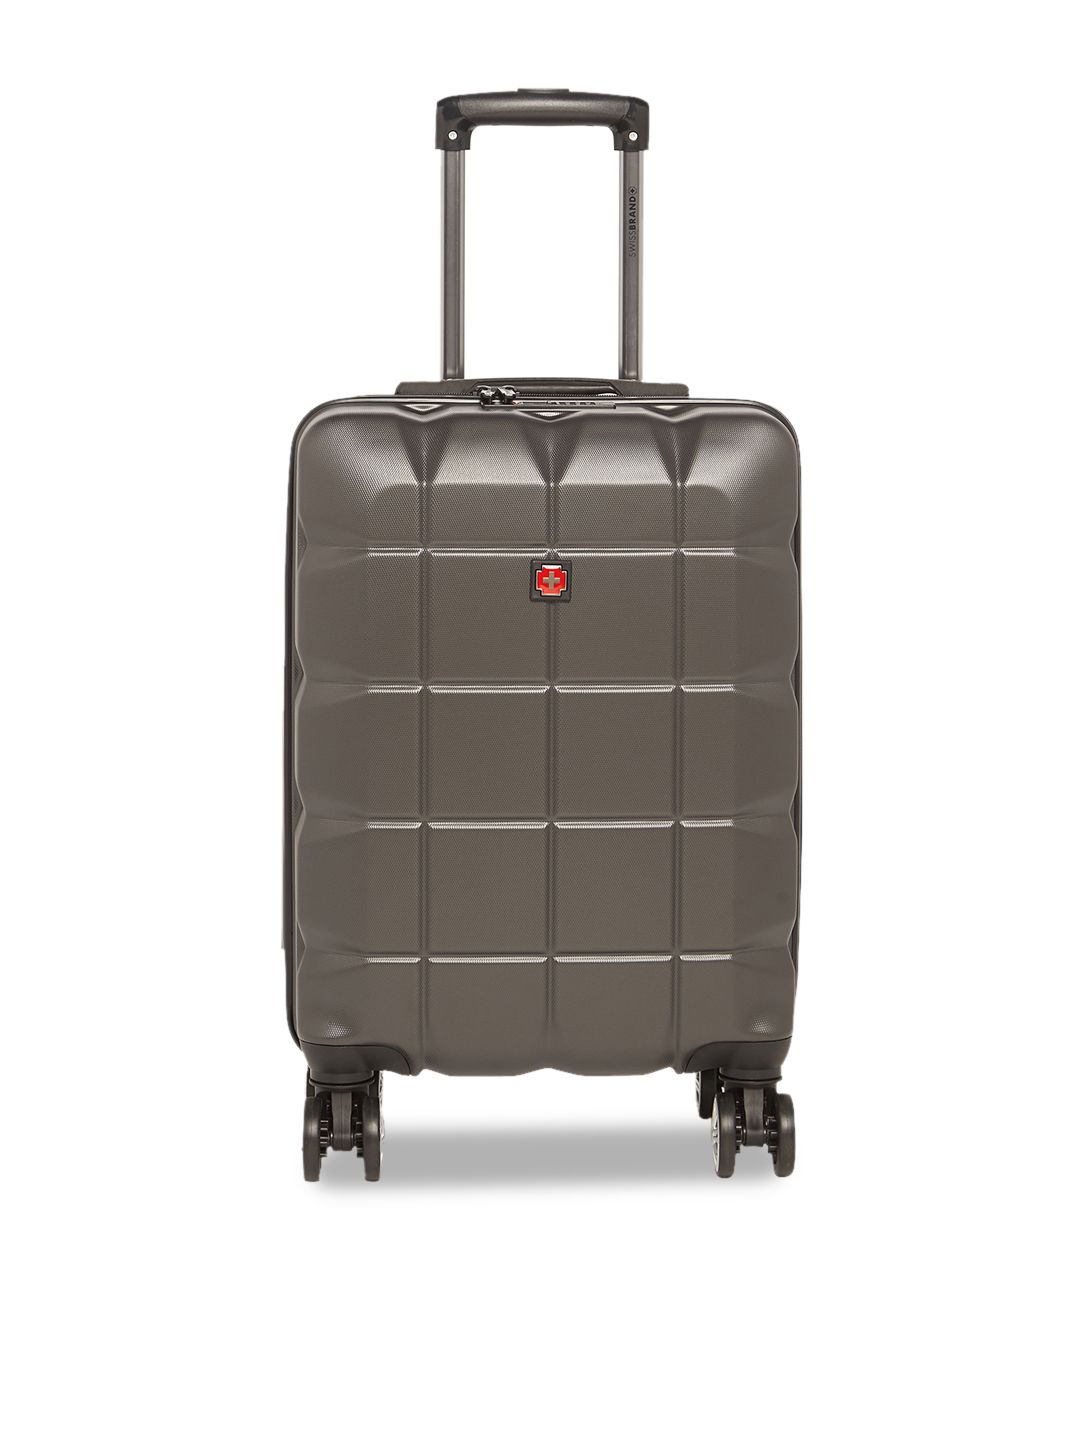 SWISS BRAND Unisex Grey Solid Friburg 360-Degree Rotation Hard-Sided Cabin Trolley Suitcase Price in India